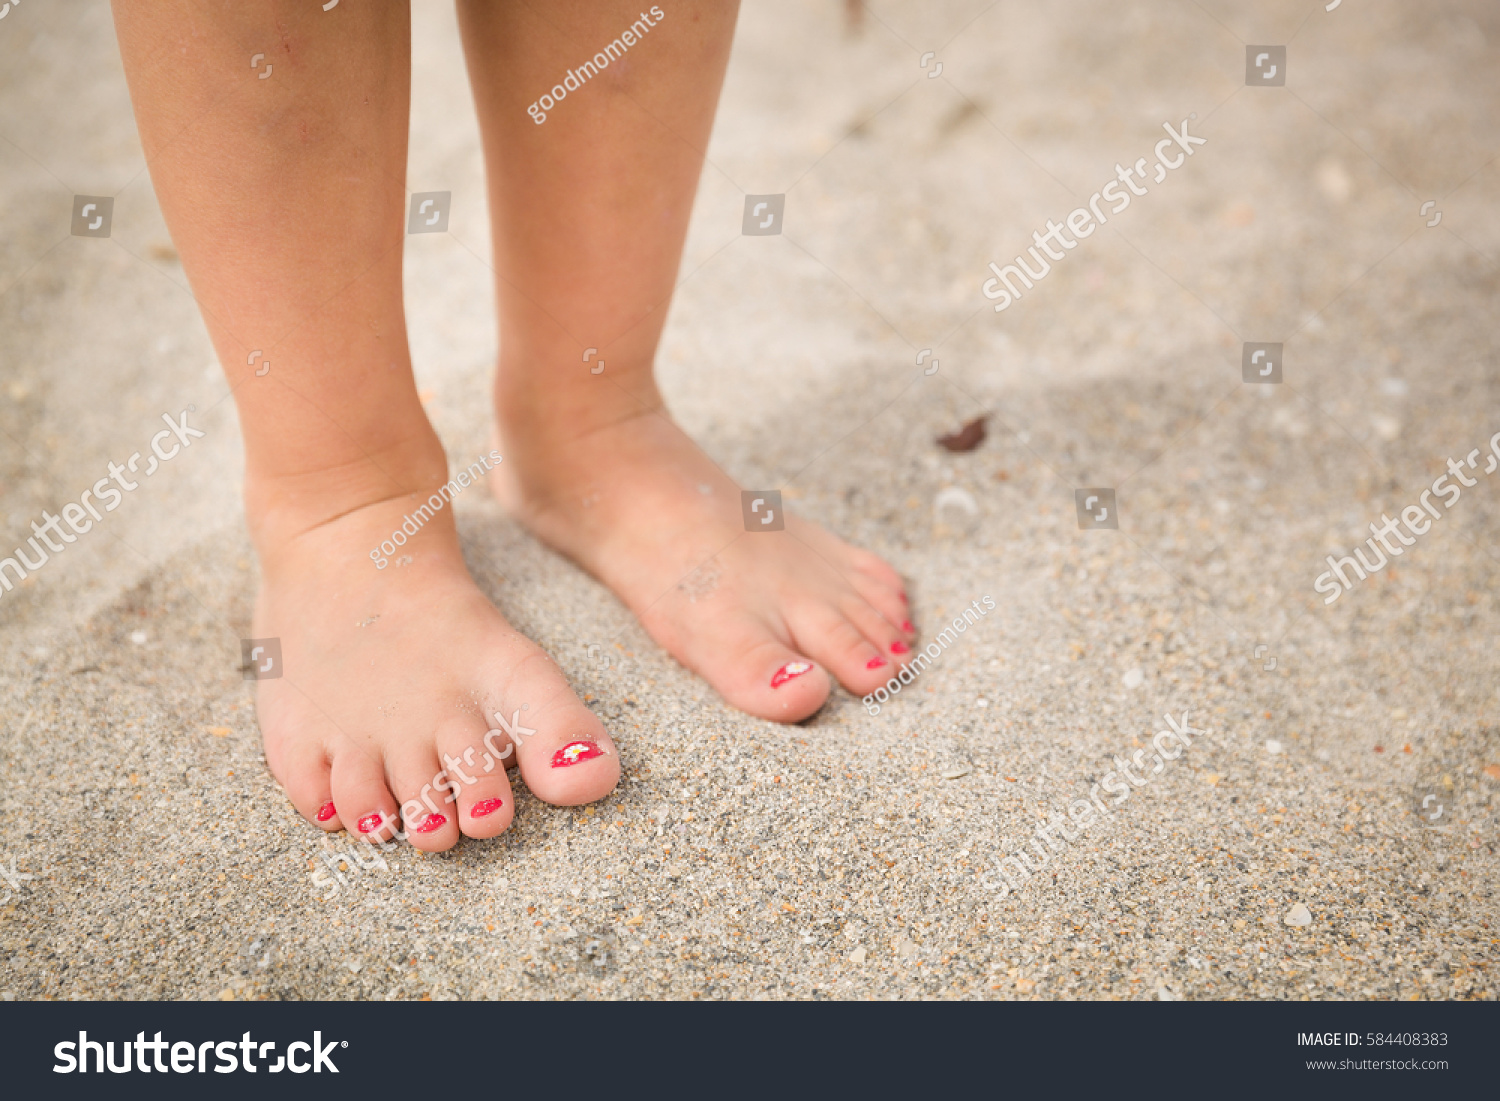 Stock Photo Closeup Of A Little Girl S Legs And Feet Walking On The Sand Of The Beach With The Sea Water In The 584408383 